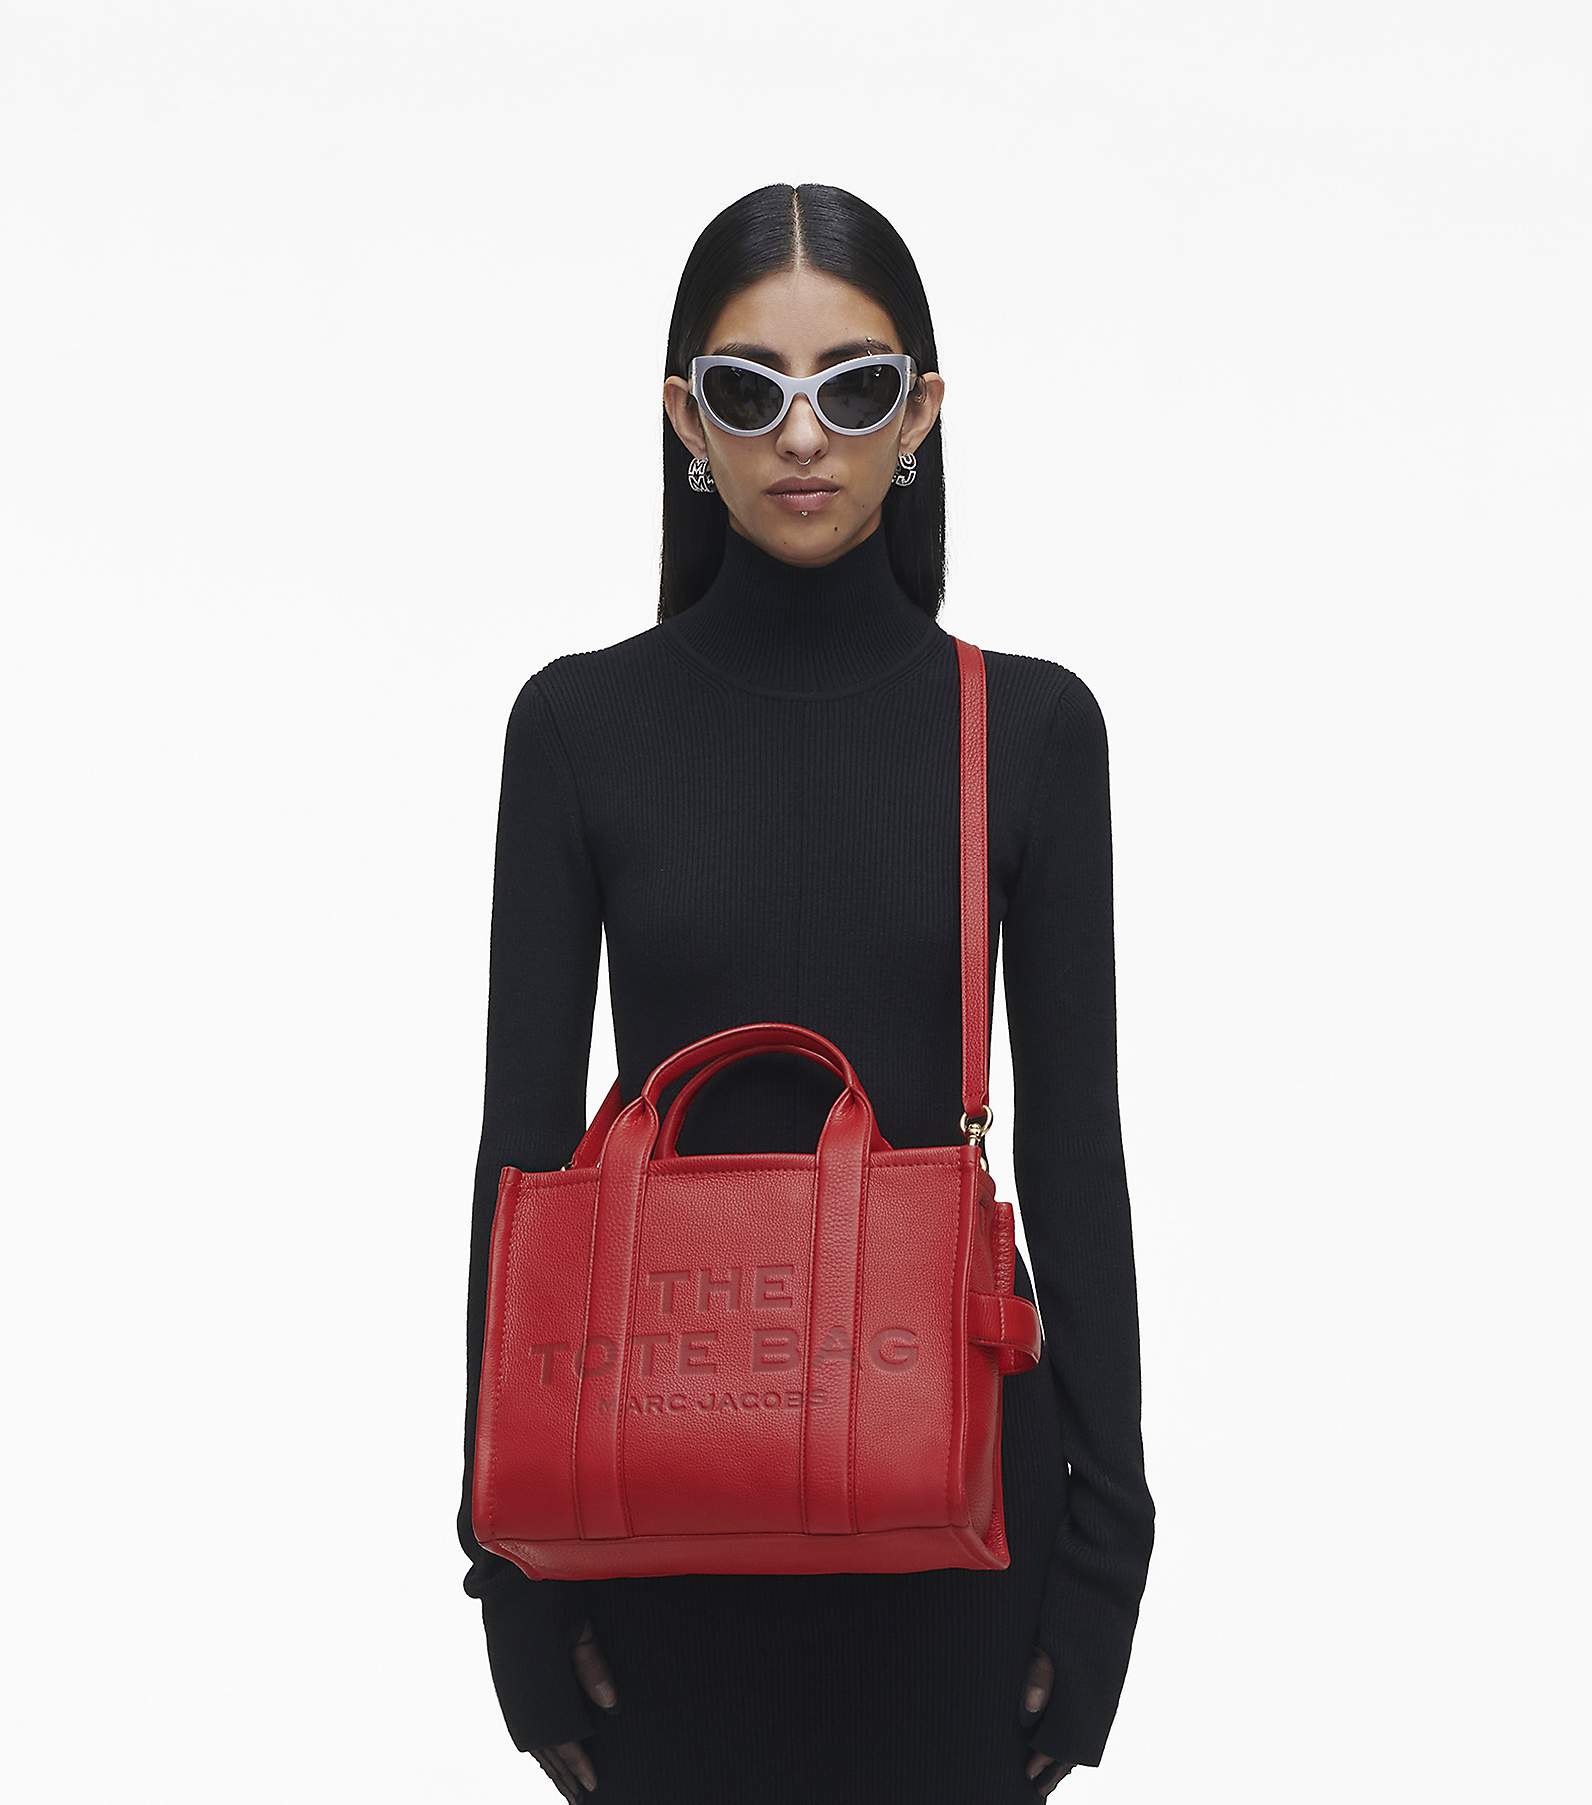 The Leather Large Tote Bag, Marc Jacobs